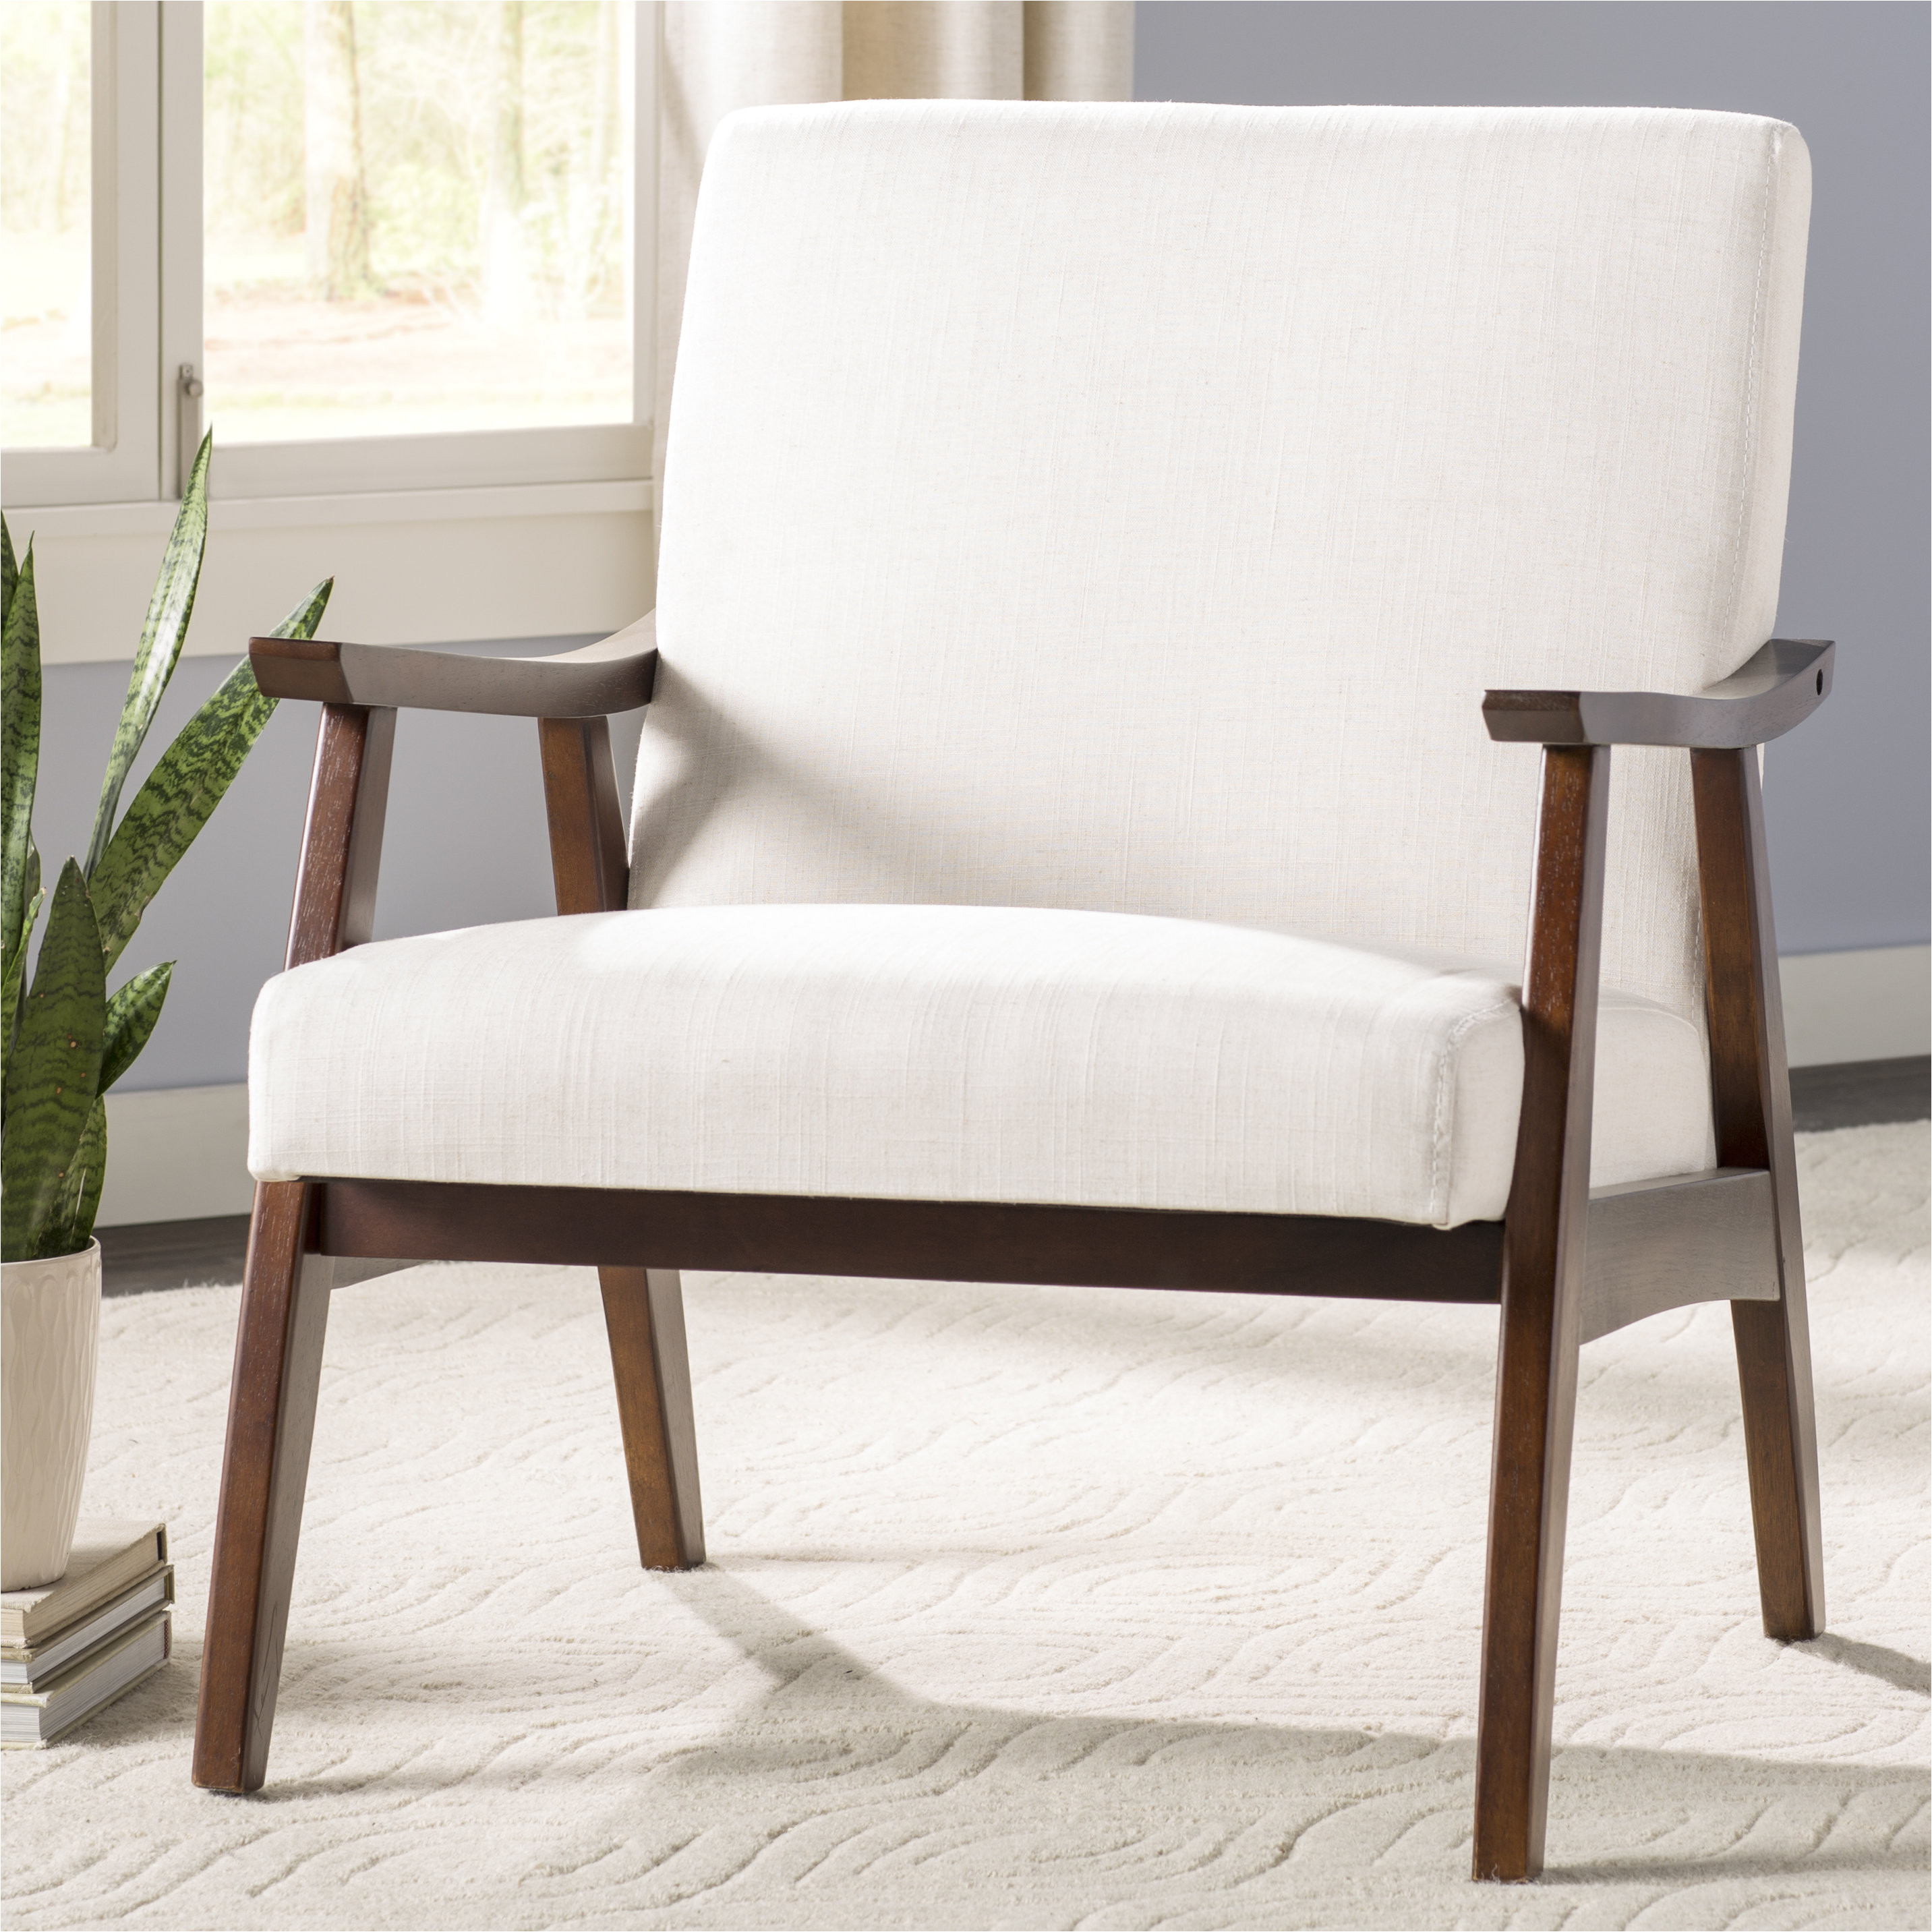 Cheap Accent Chairs Under 100 | AdinaPorter